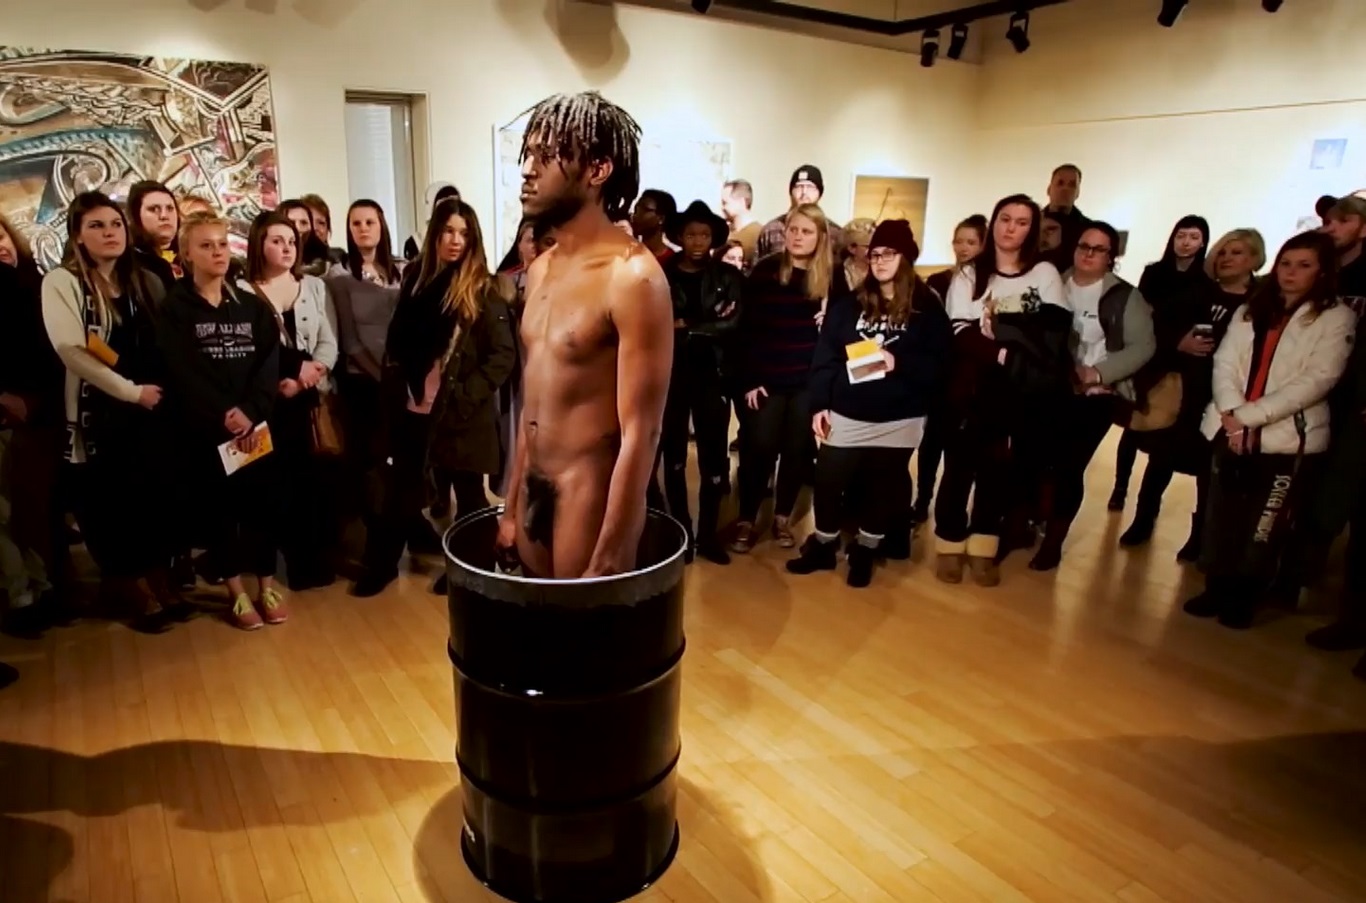 attend an art performance with a black guy 